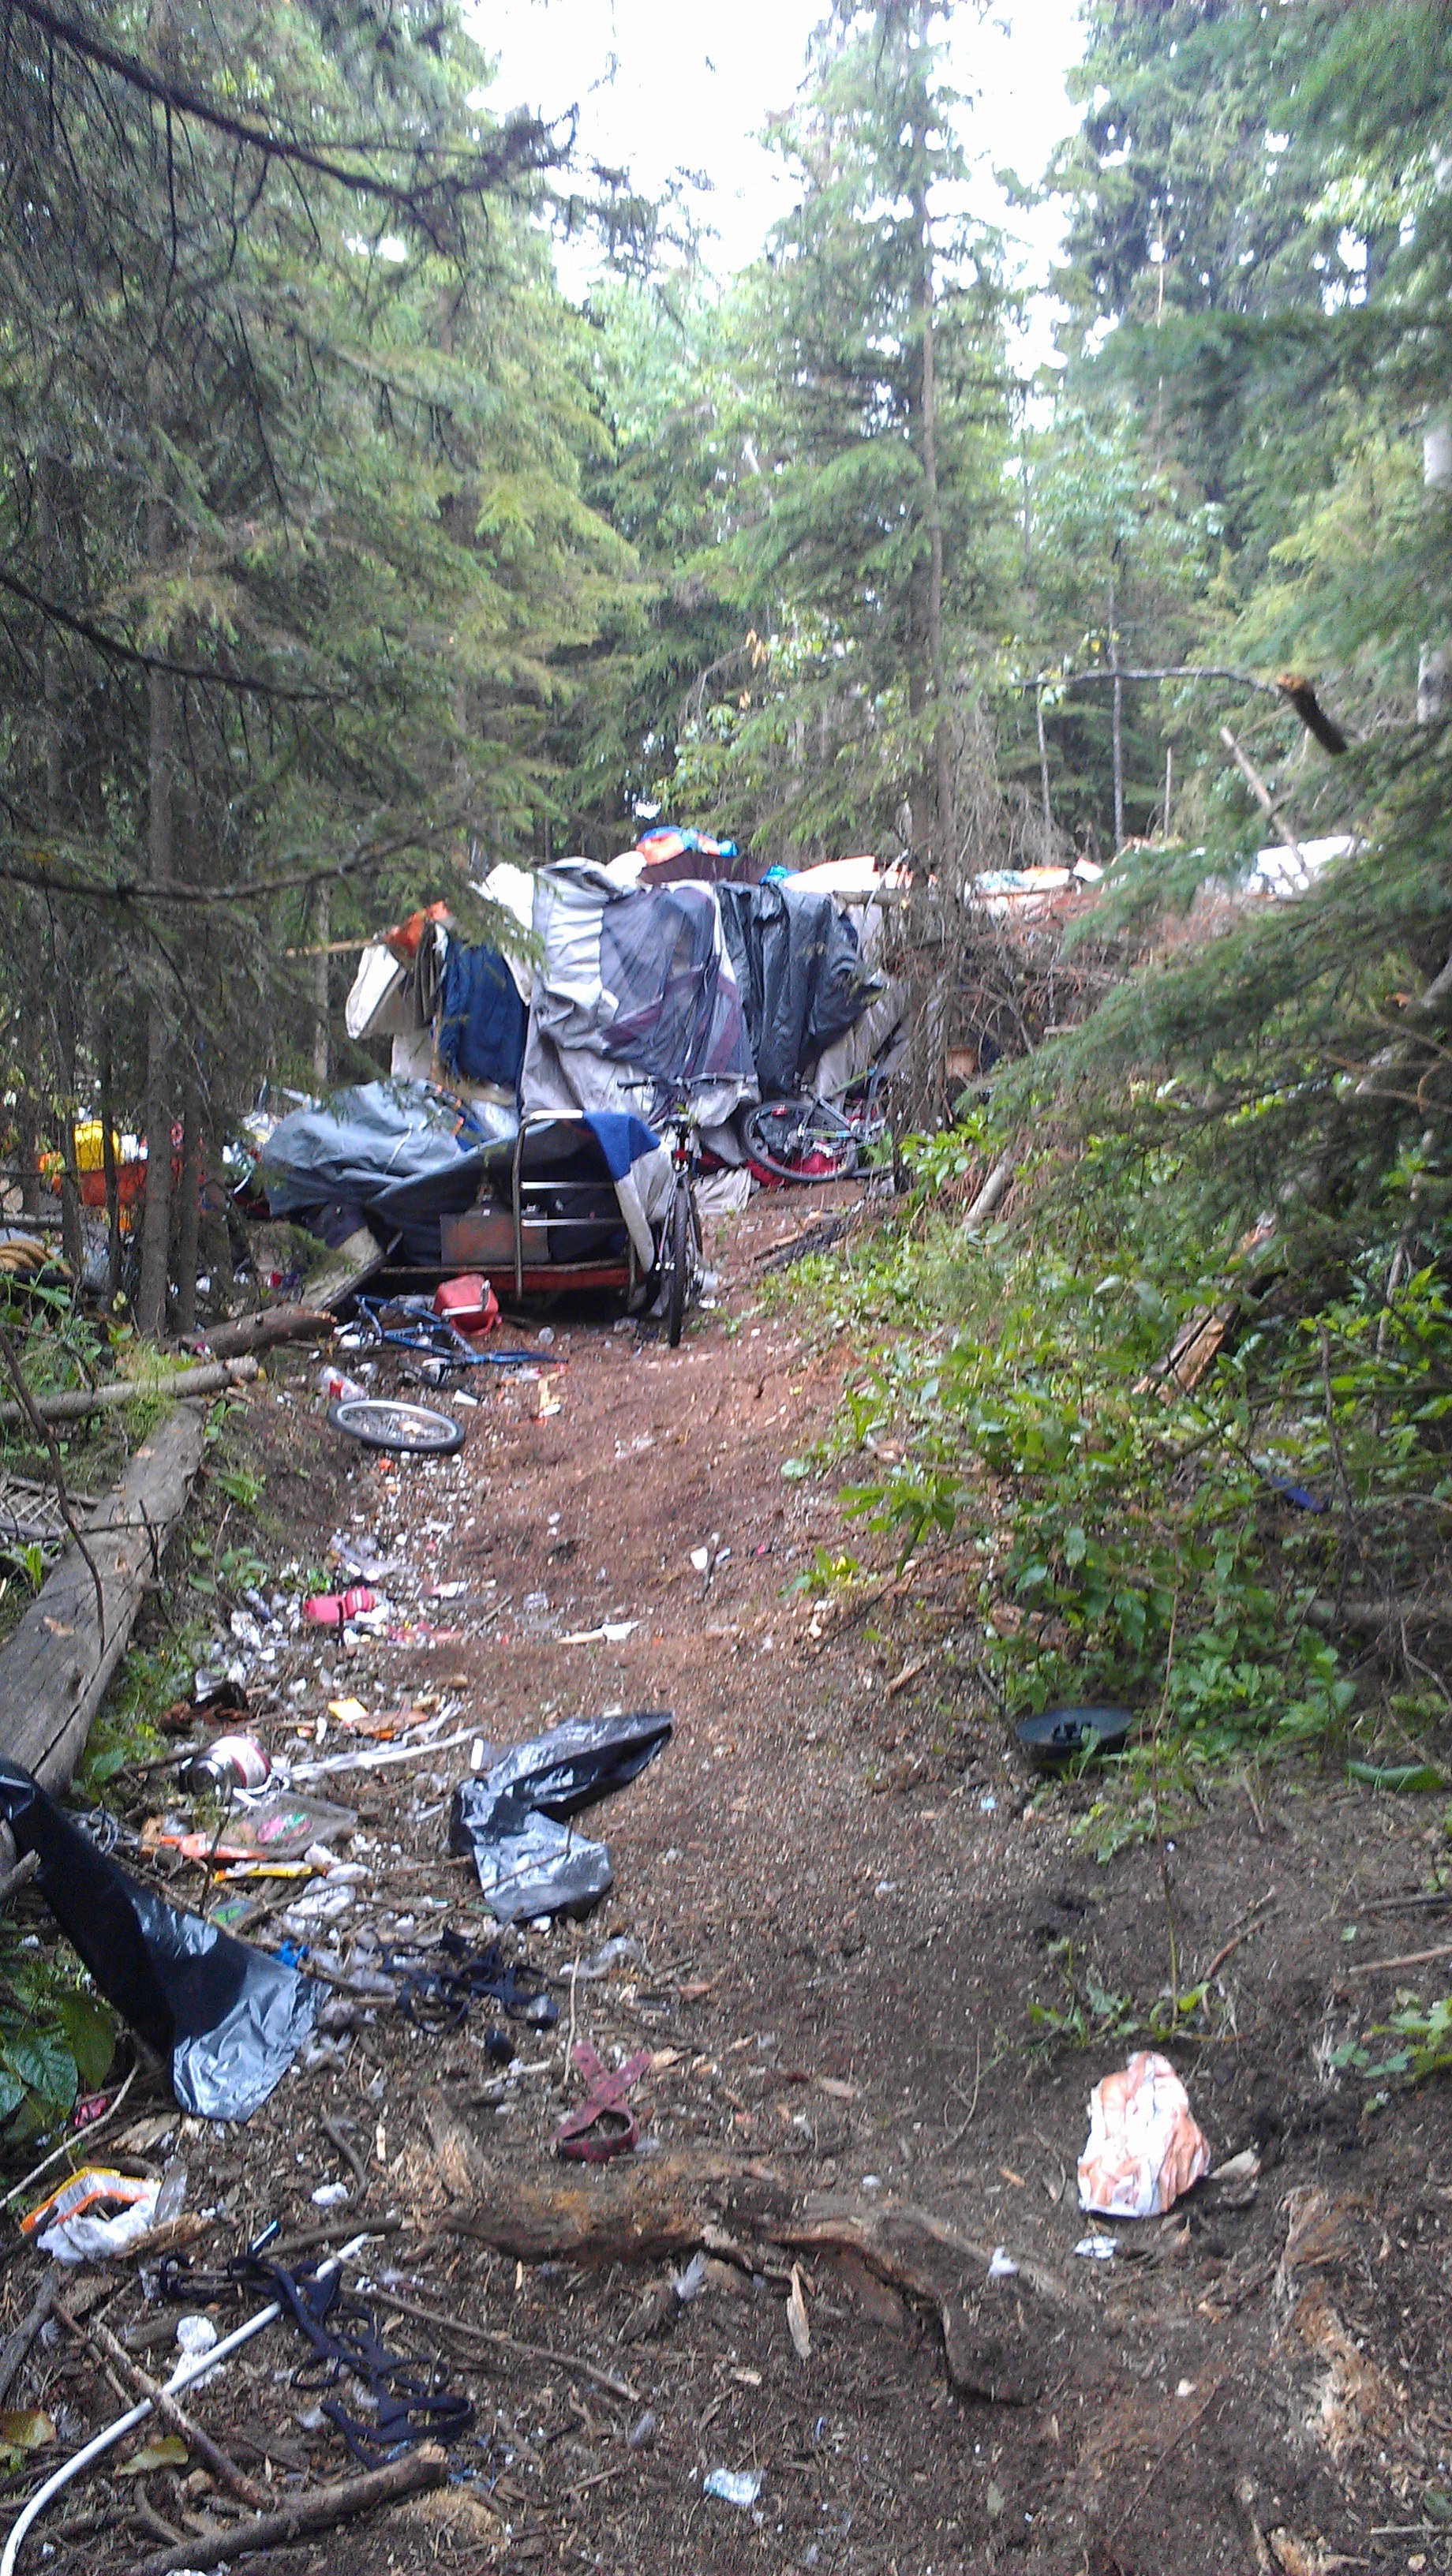 CLEAN-UP – Pictured here is part of a homeless camp located near Gasoline Alley. Local agencies are working to help the residents of the area.